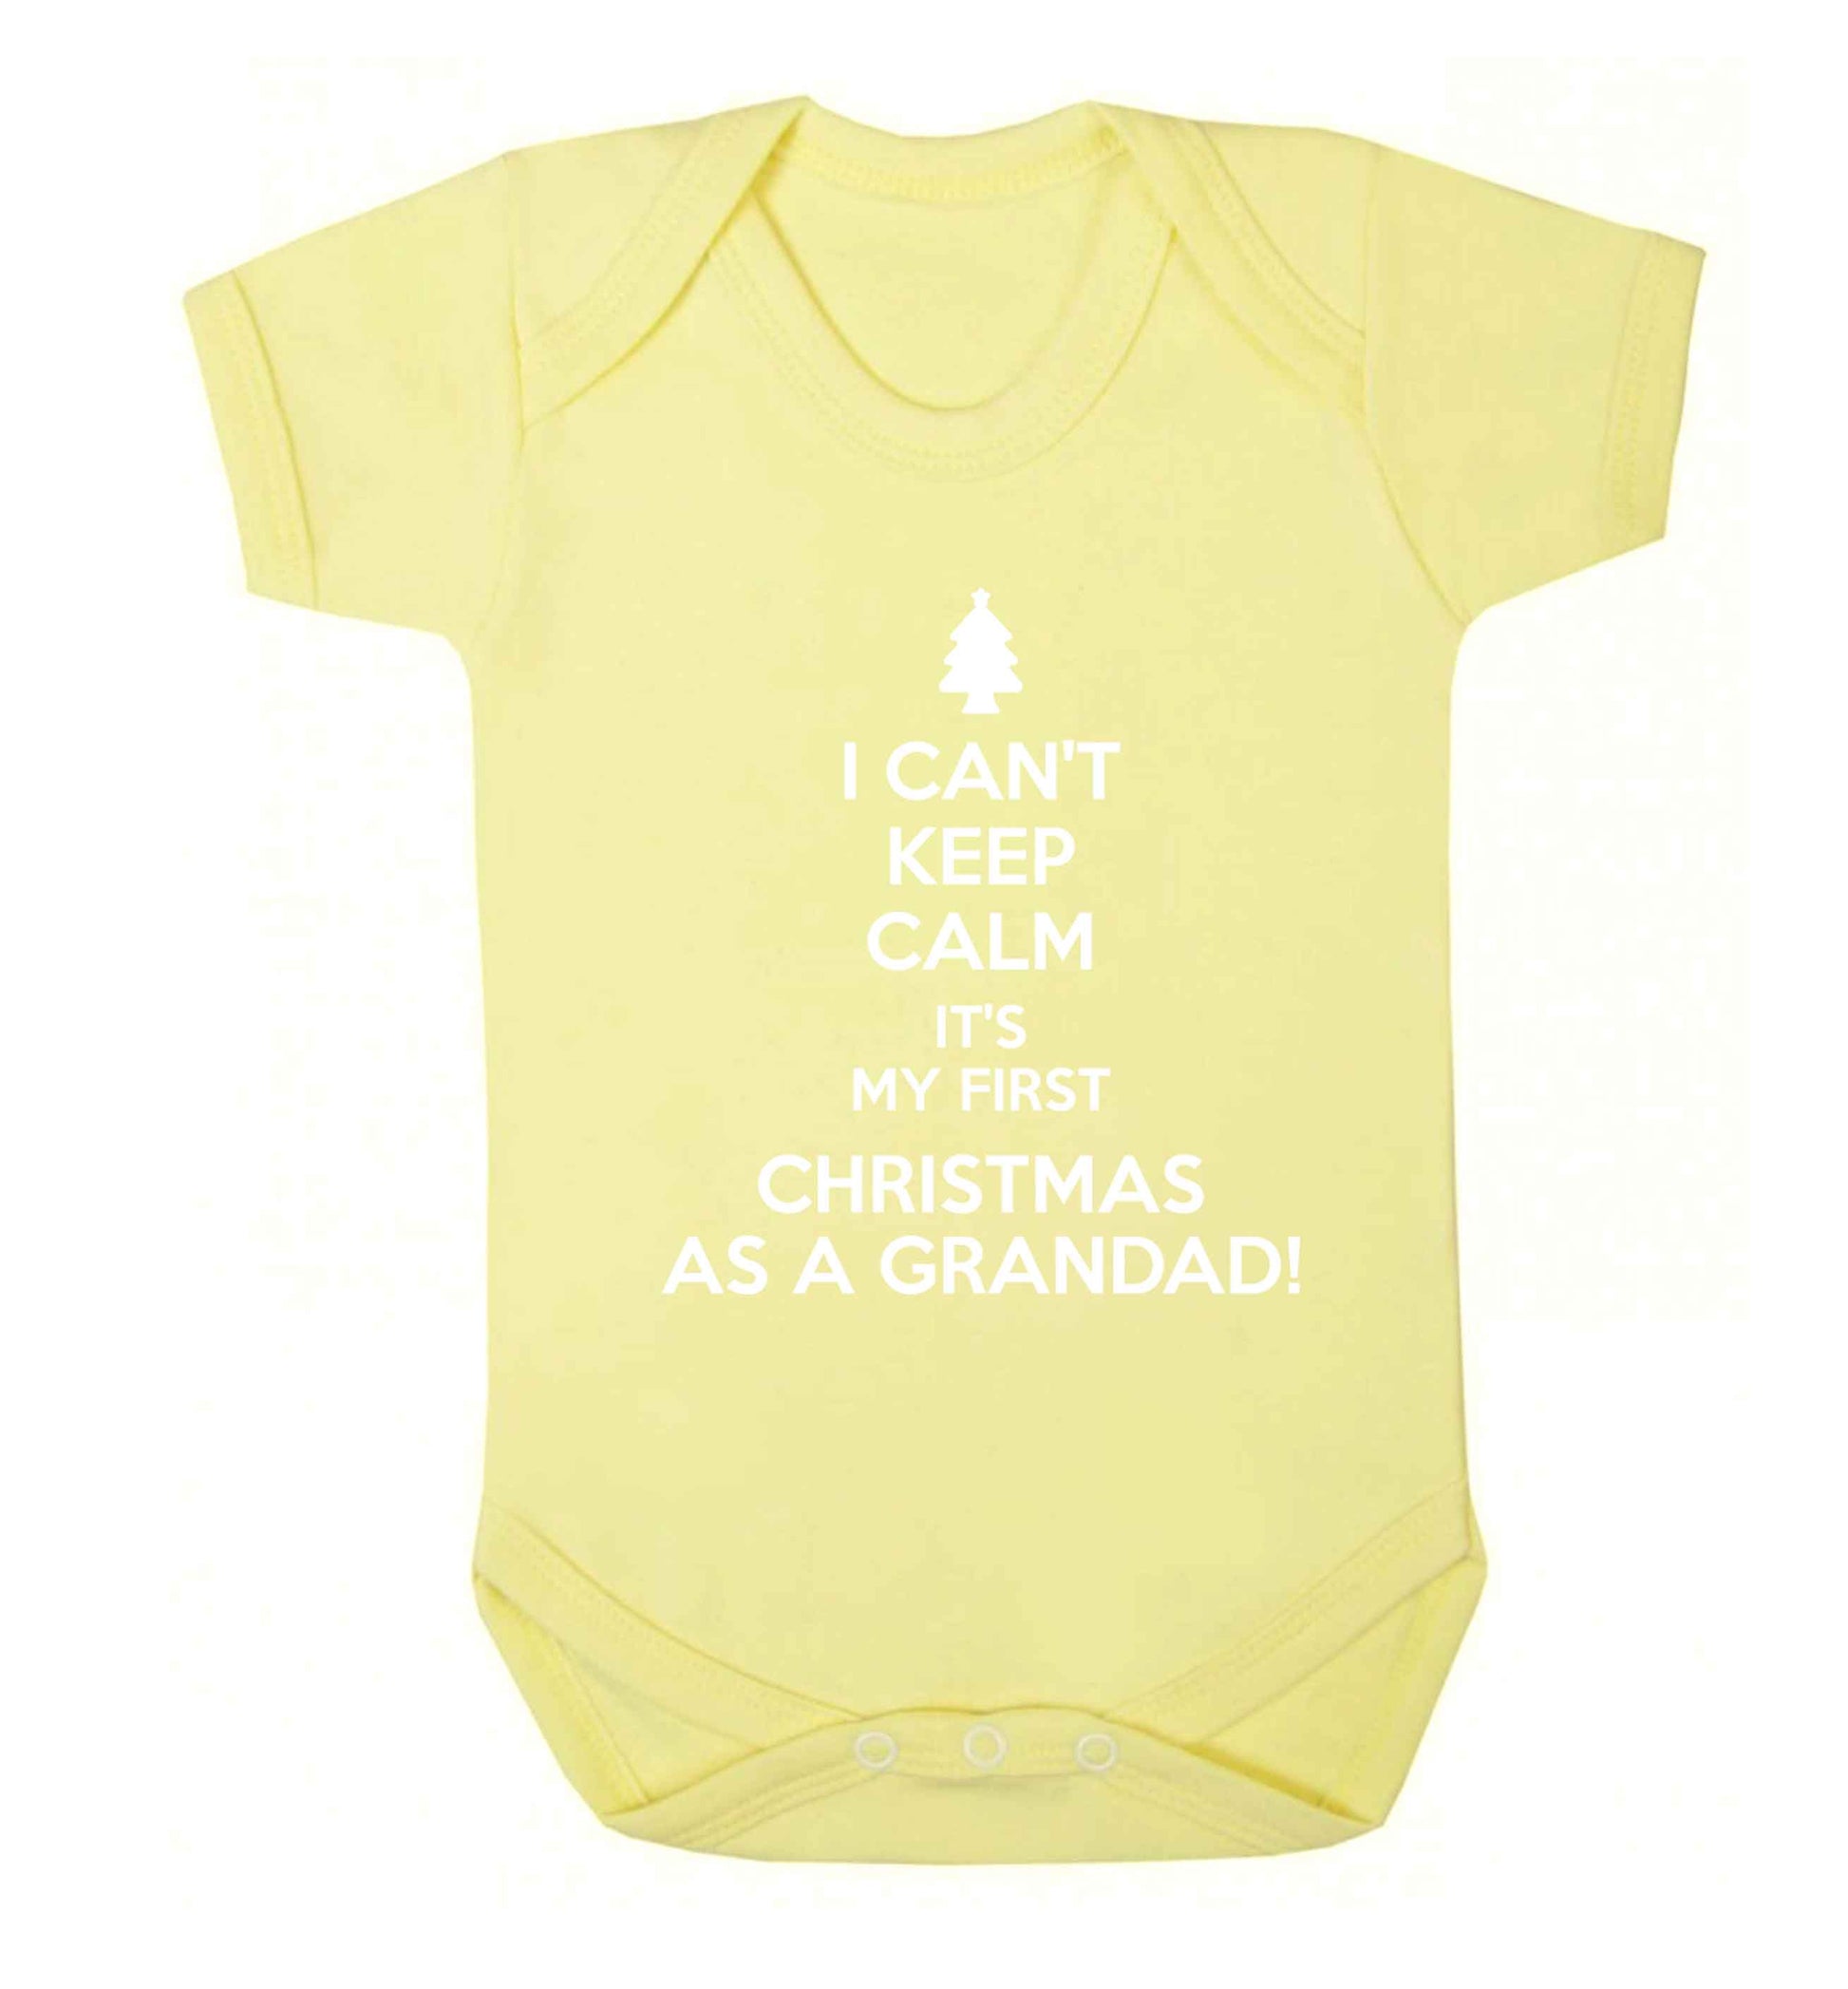 I can't keep calm it's my first Christmas as a grandad! Baby Vest pale yellow 18-24 months